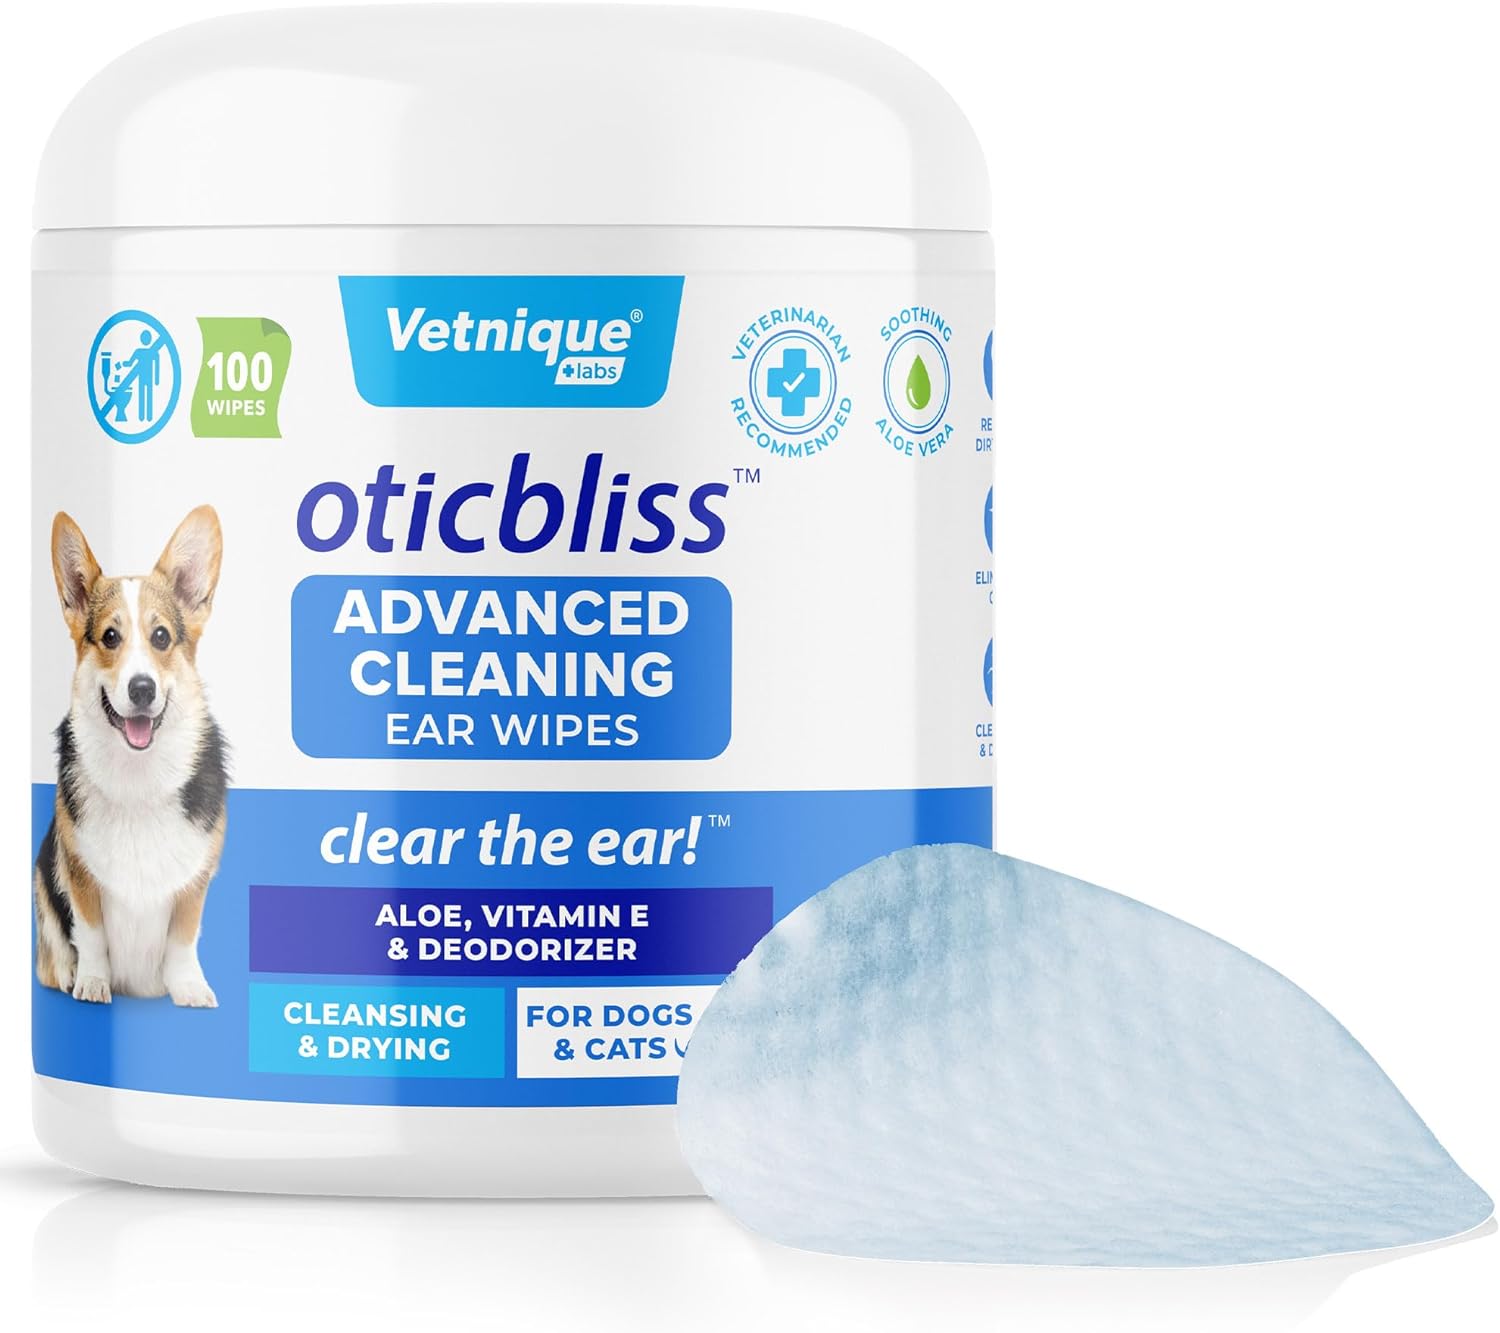 VETNIQUE Oticbliss Advanced Cleaning Ear Wipes for Dogs & Cats for Odor Control, Dirt and Wax Removal with Soothing Aloe Vera, Drying Agent and Vitamin E, Clear the Ear 100ct Wipes